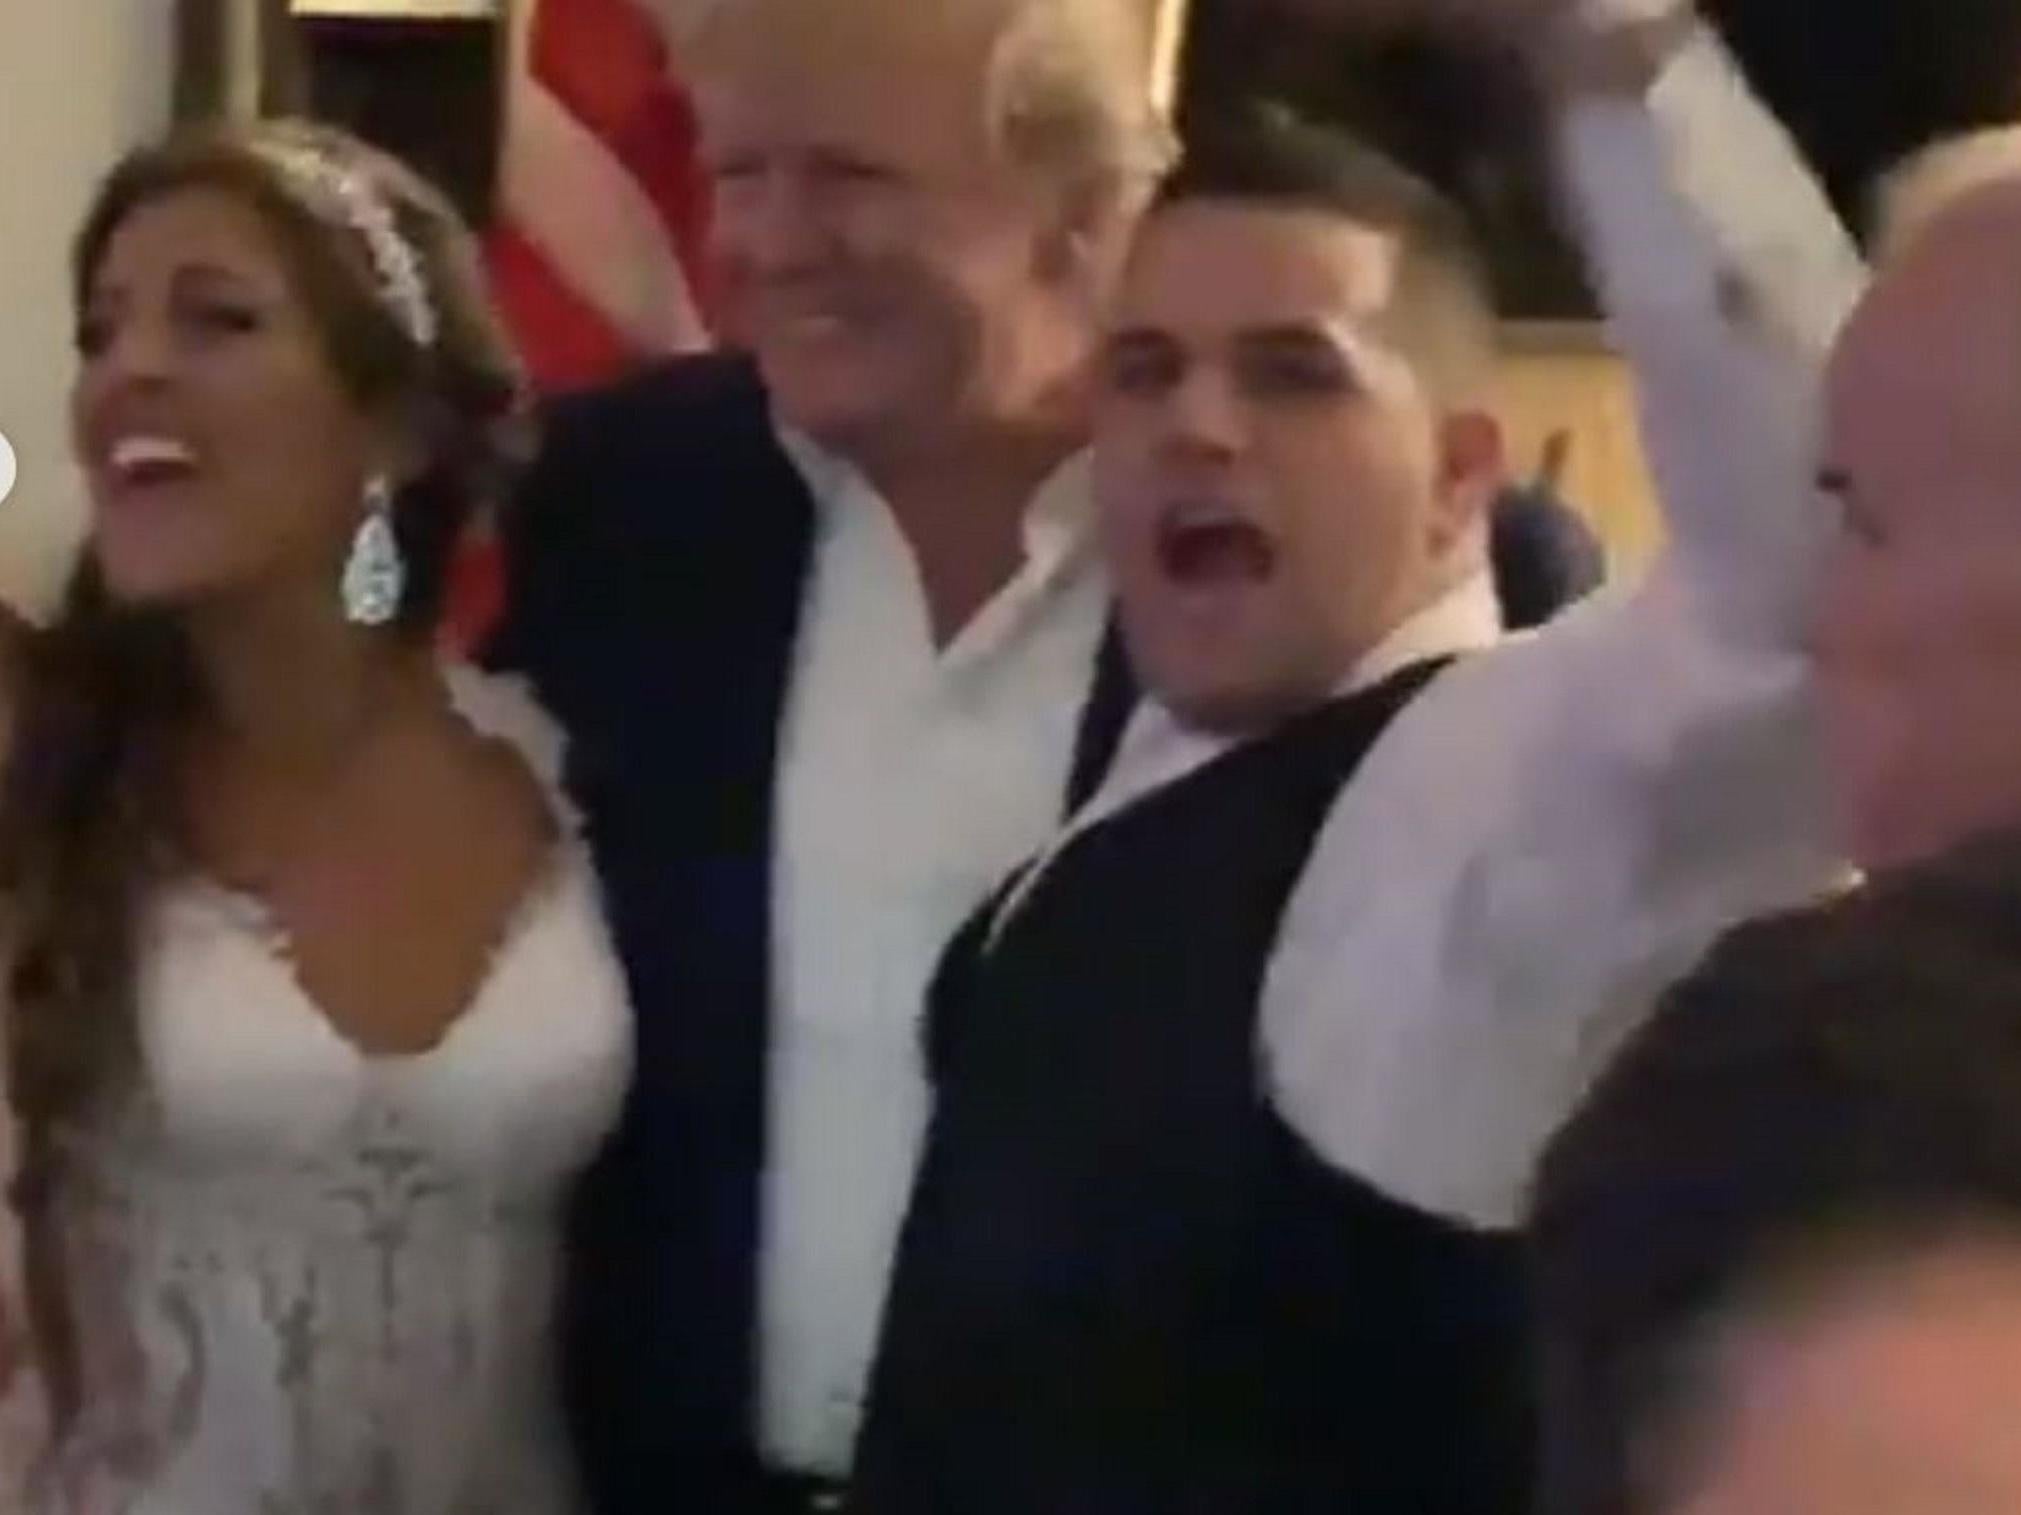 US president Donald Trump made a surprise appearance at the wedding of Nicole Marie and PJ Mongelli at his Bedminster golf club in New Jersey.